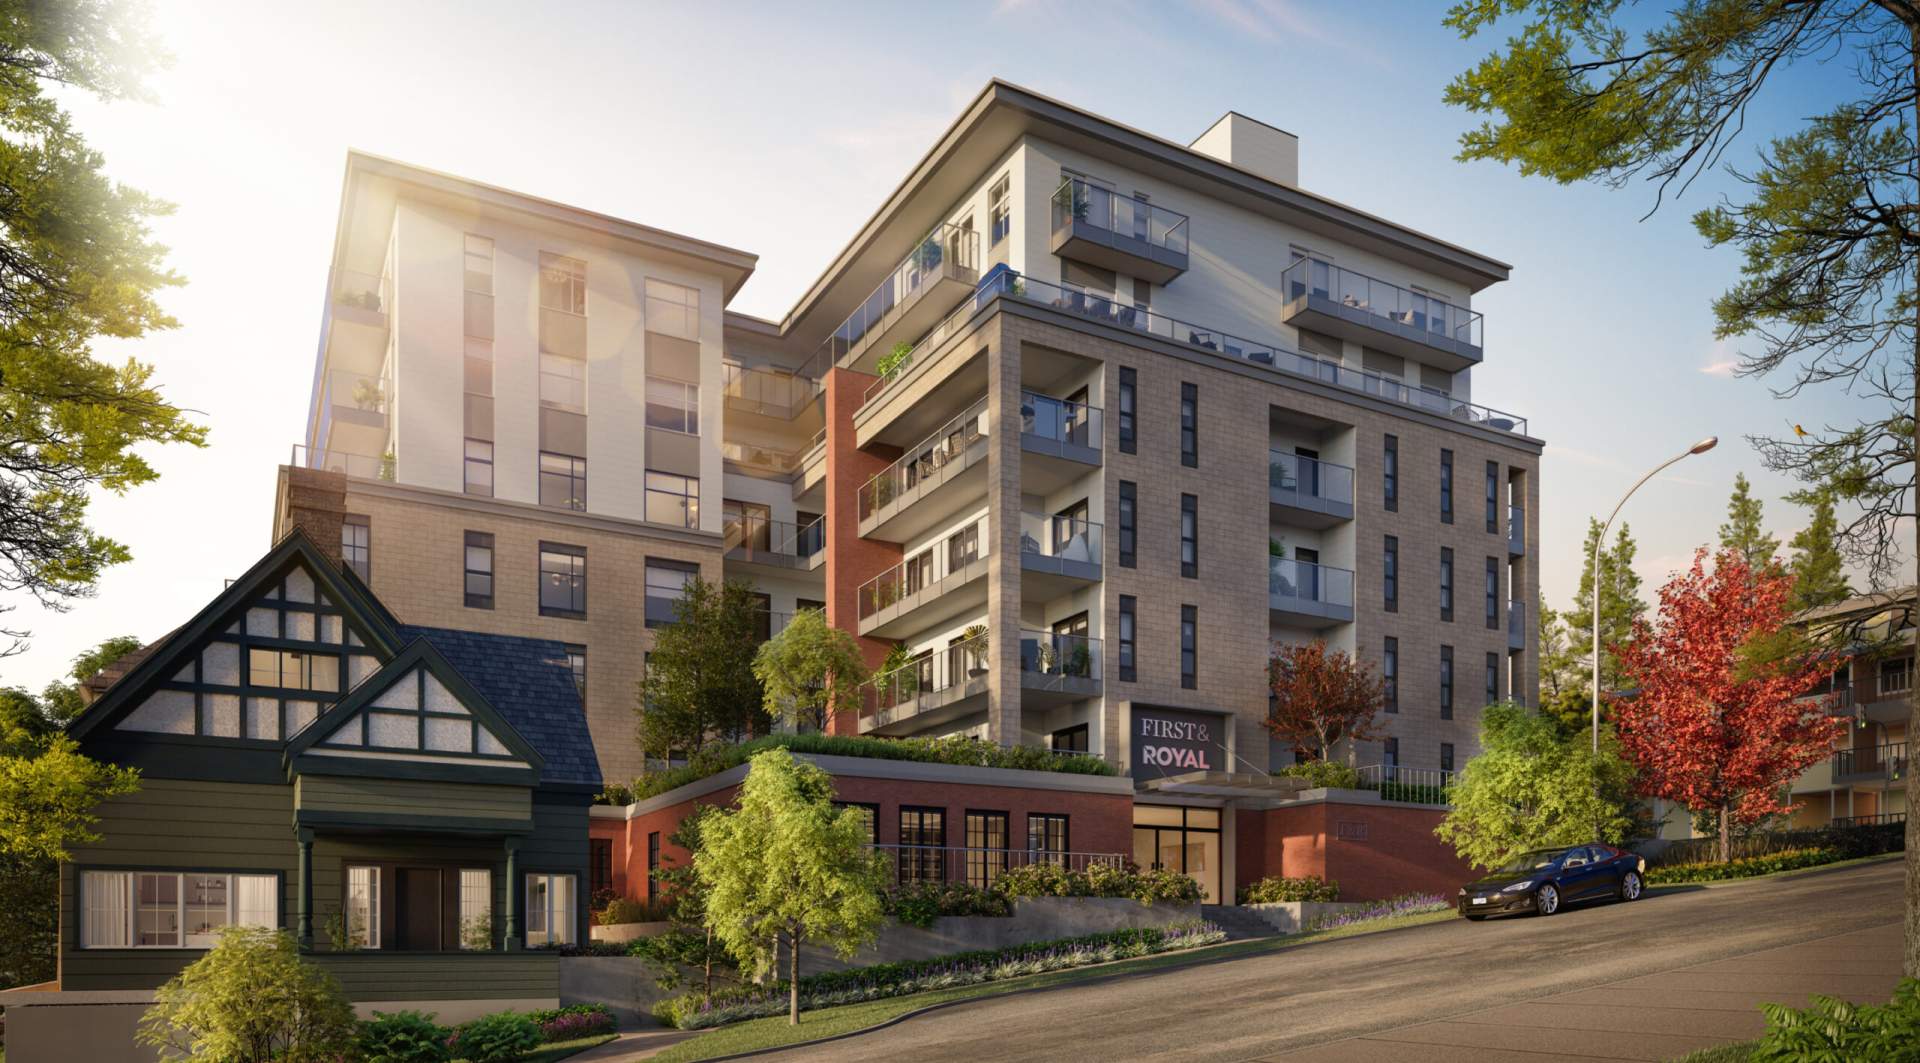 A diverse collection of homes from 1-bedroom condos to 3-bedroom townhomes.